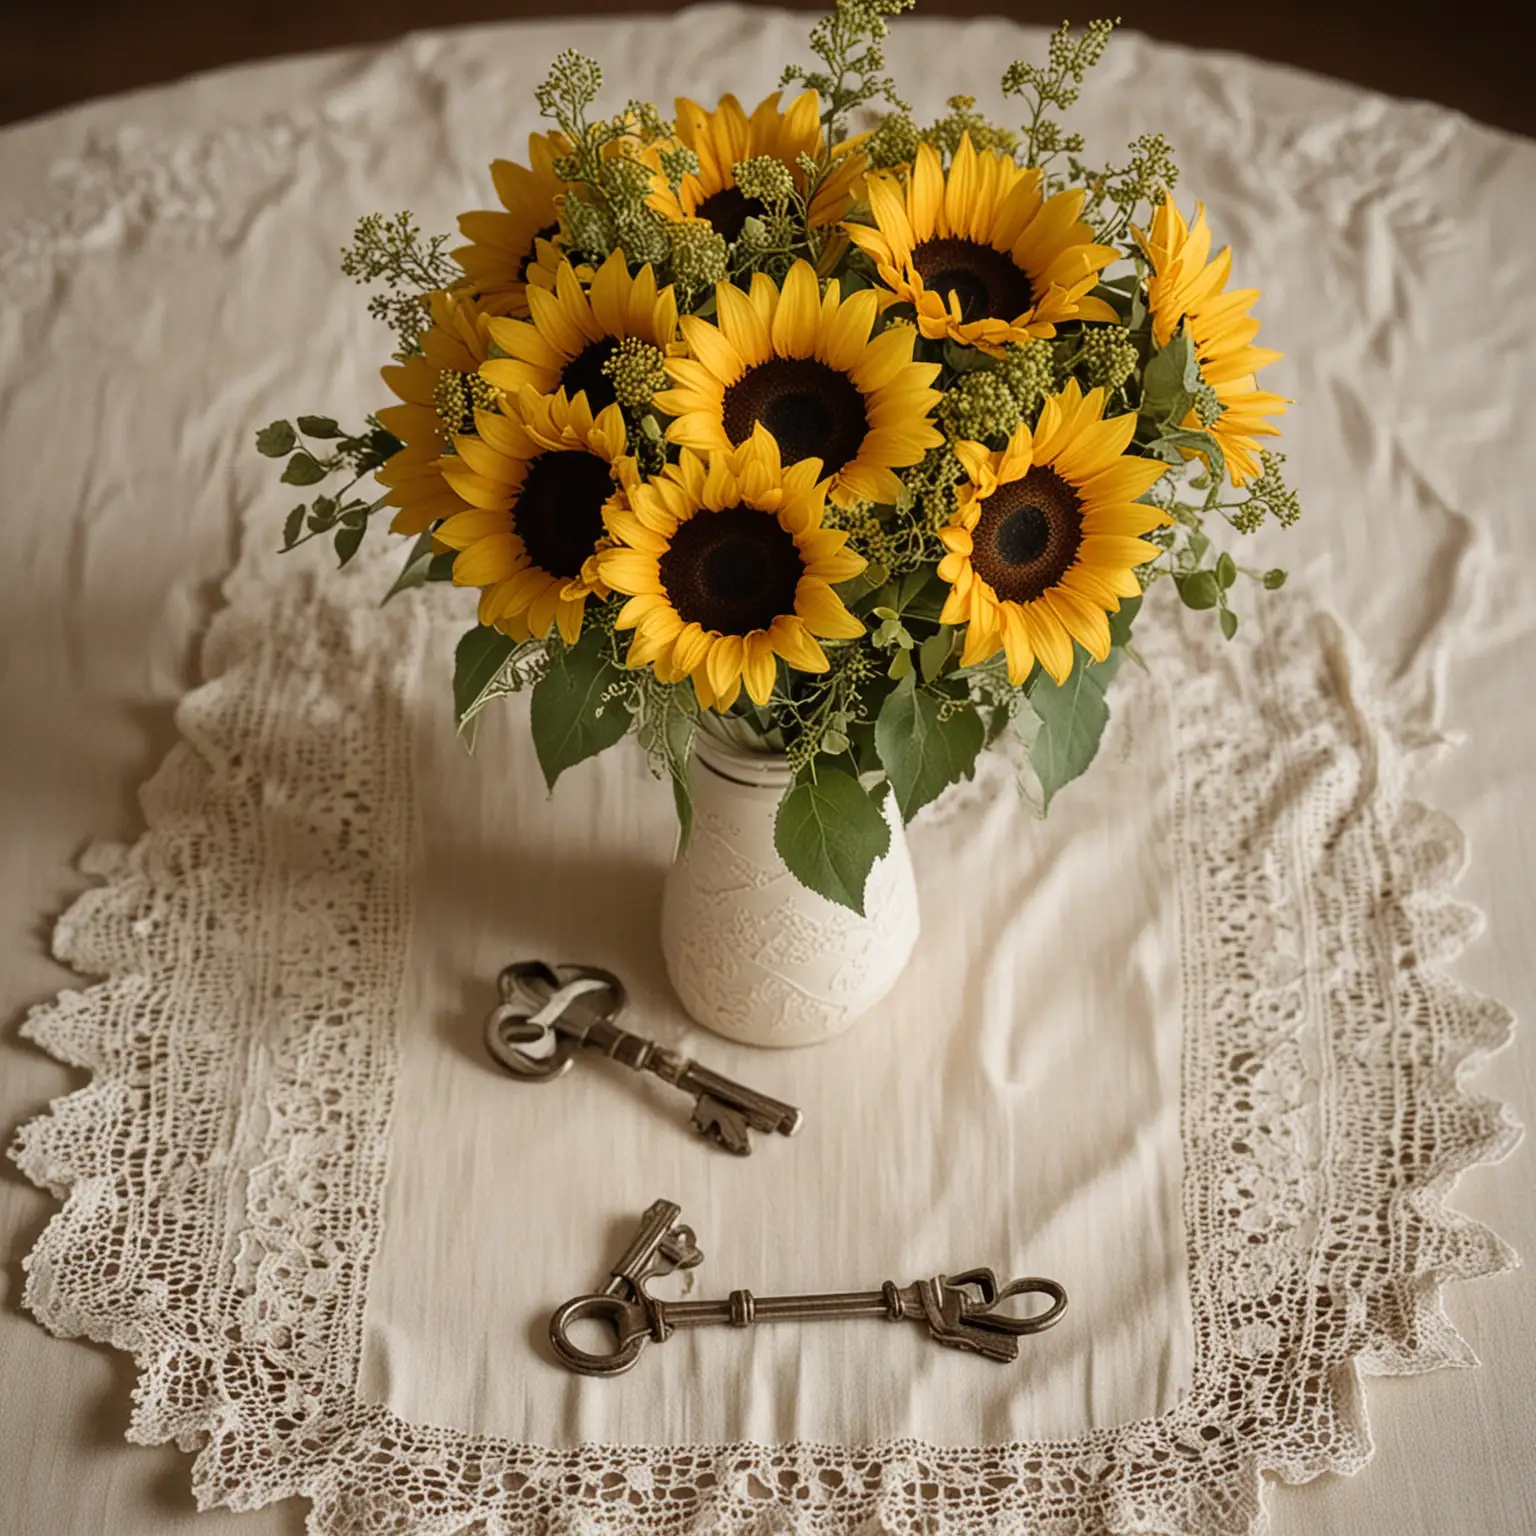 small and simple vintage centerpiece with an antique ivory vase holding a small bouquet of sunflowers and a few small vintage keys are laying around the base of the vase, all set on a lace placemat